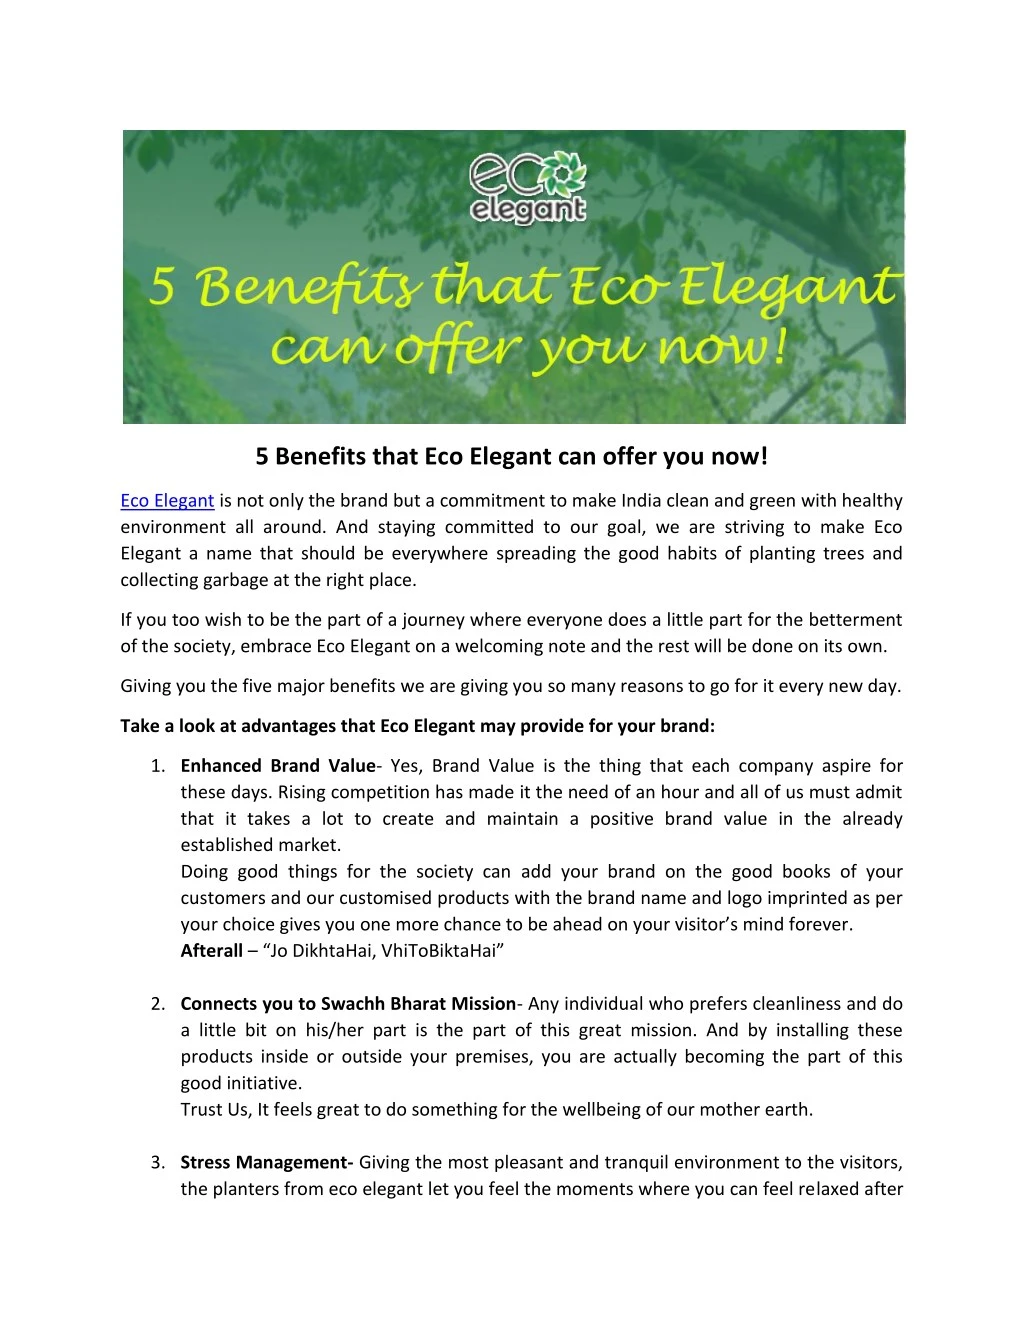 5 benefits that eco elegant can offer you now